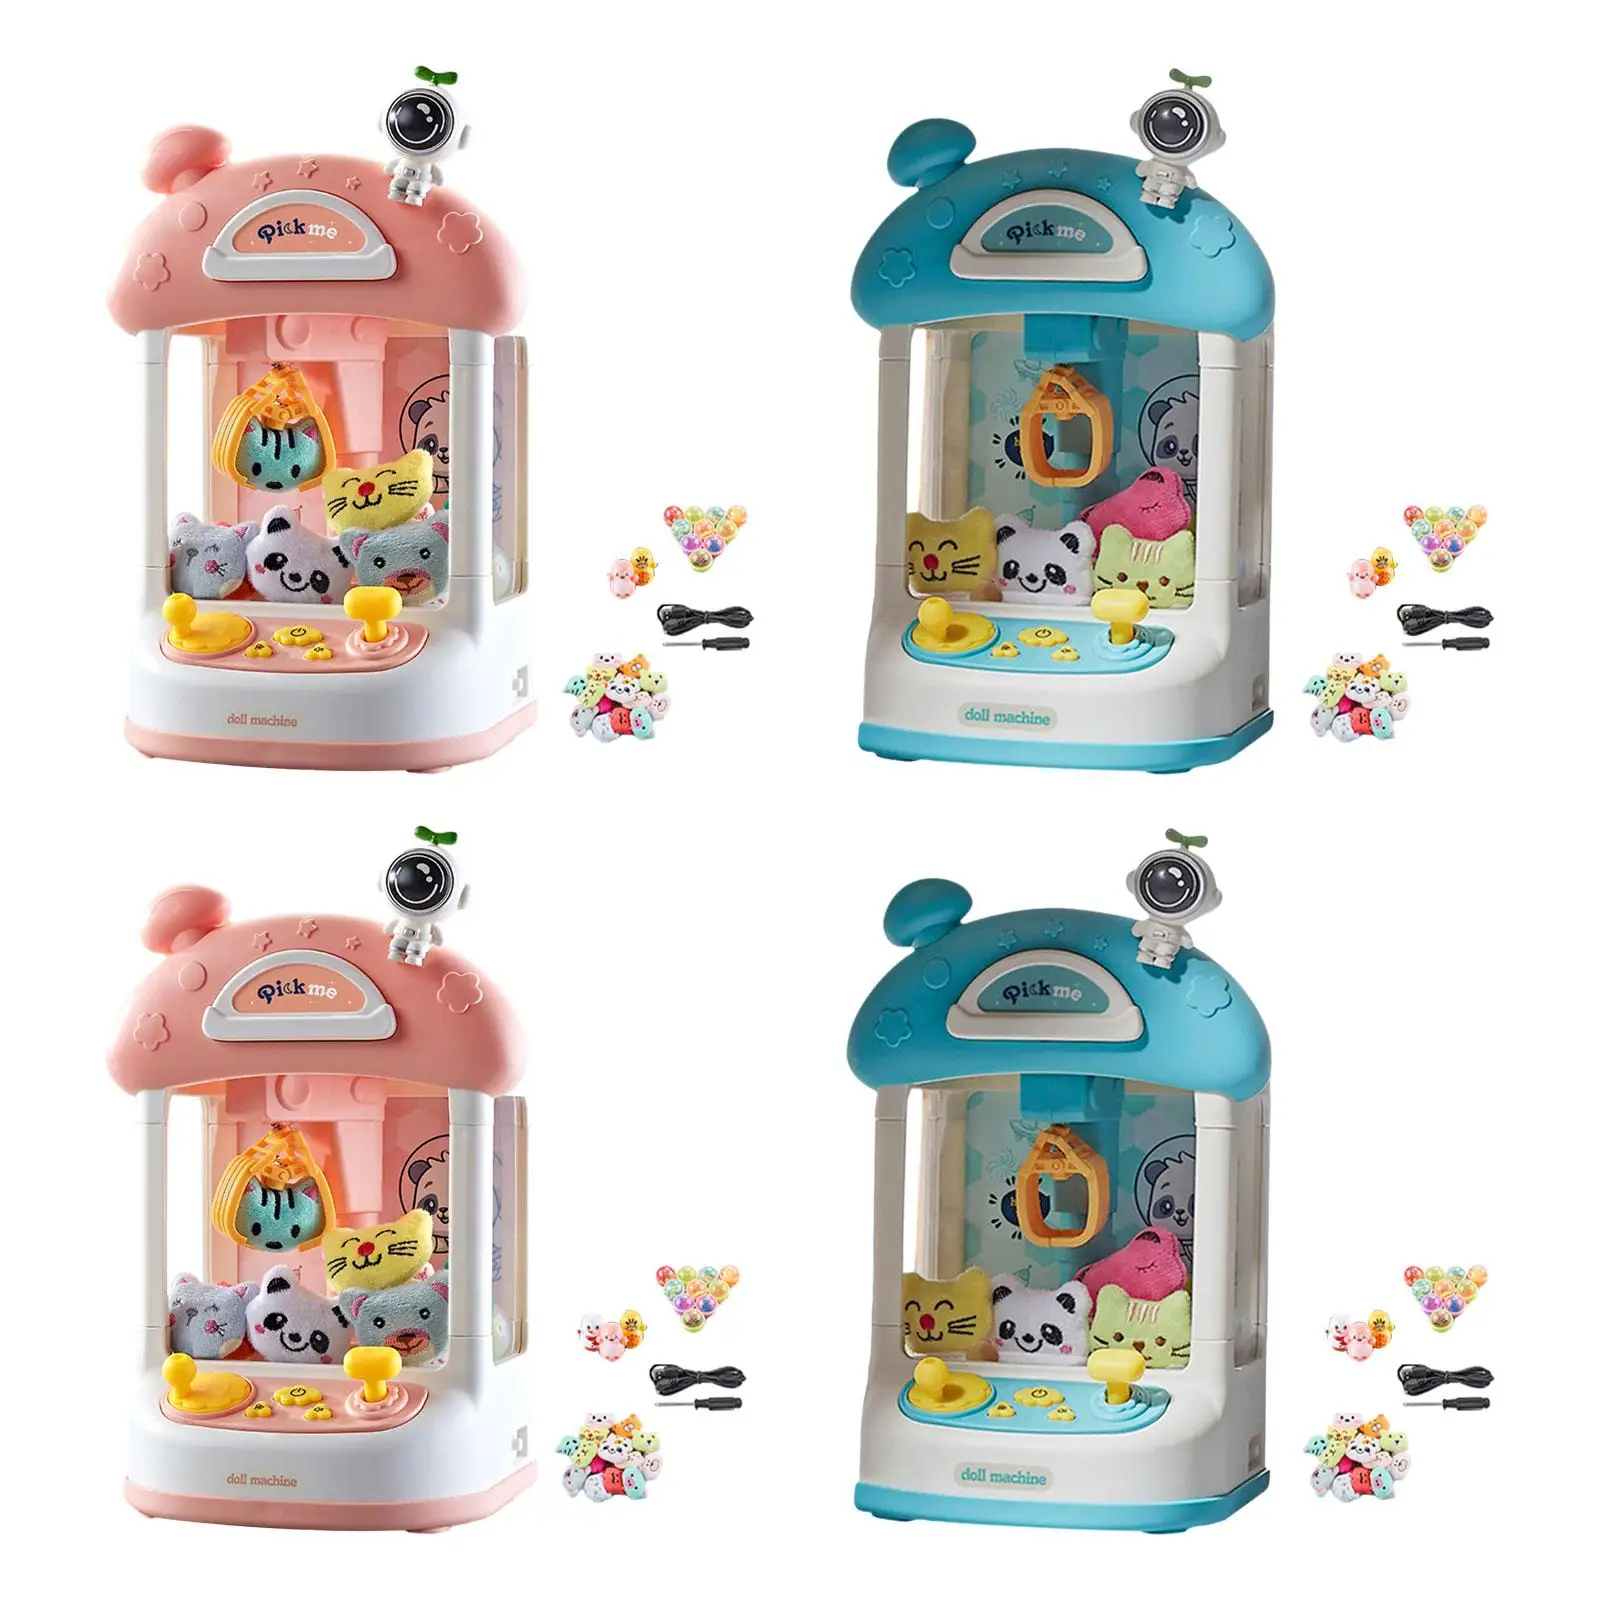 Small Claw Machine Portable with Music and Lights Holiday Present Indoor Grabber Plush Candy Prizes Dispenser Kids Vending Toy